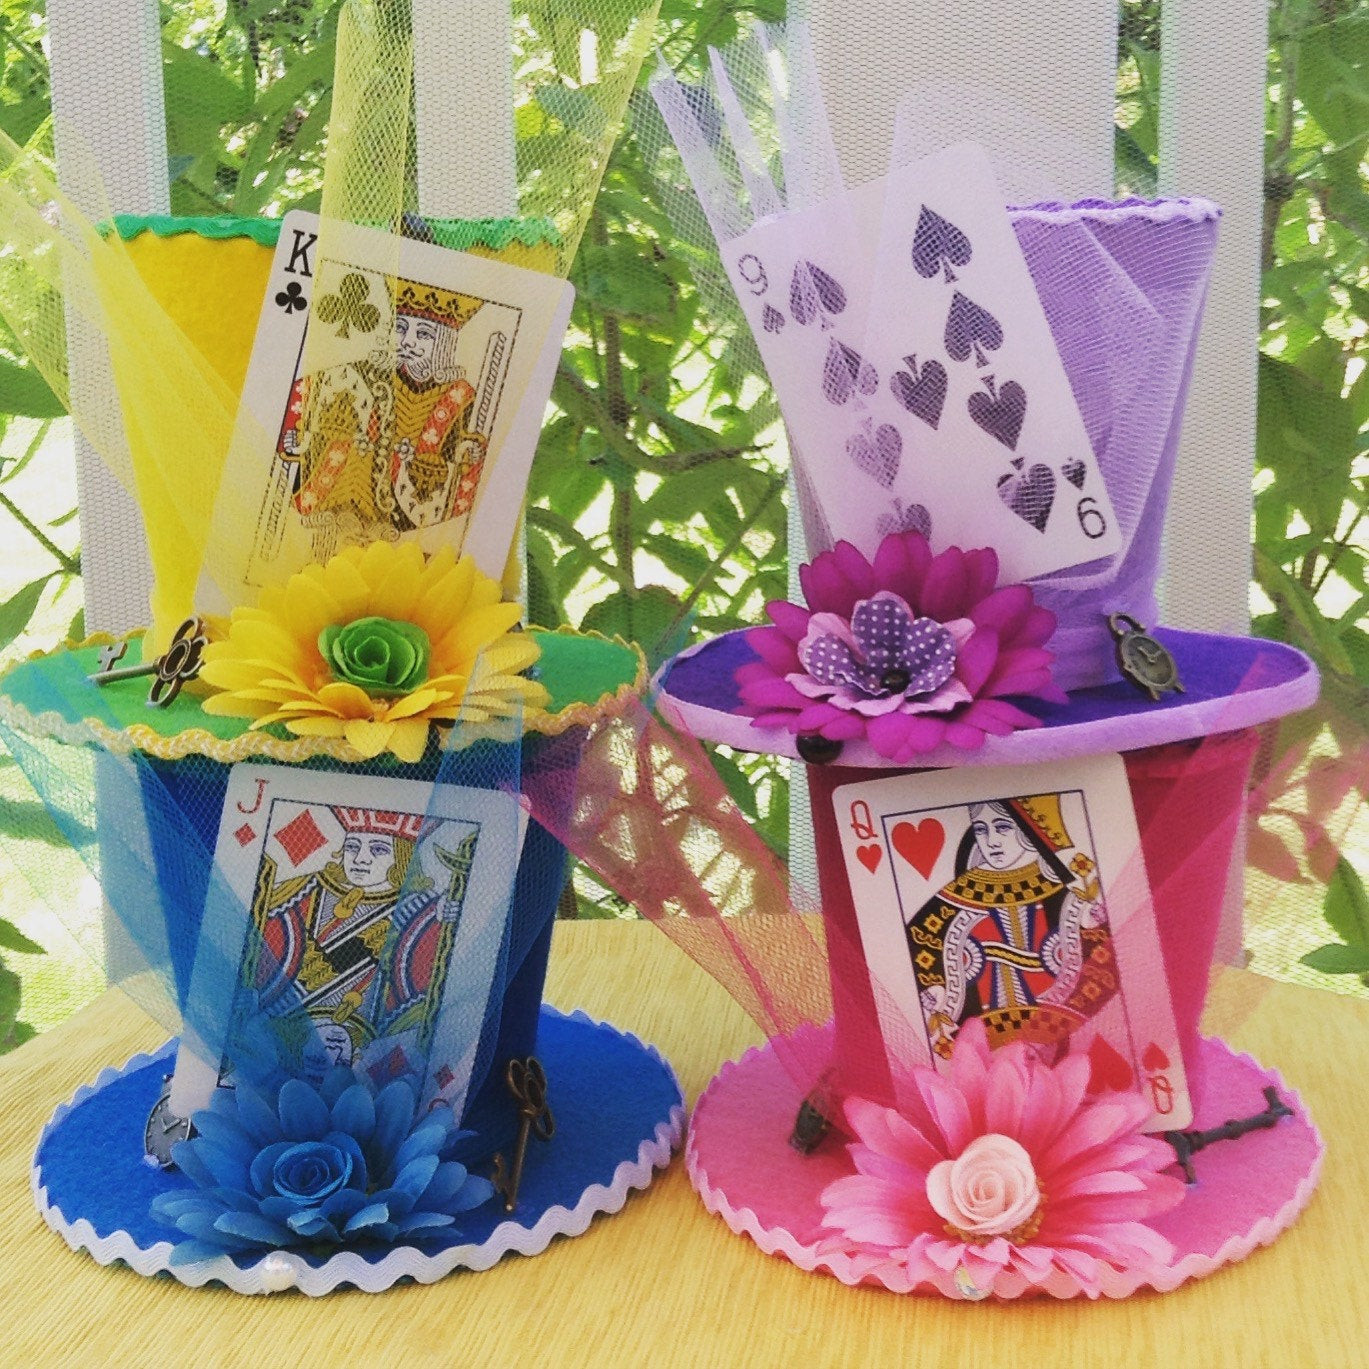 Mad Hatter Tea Party Birthday Ideas
 Mad Hatter Tea Party Decorations Set of 4 Alice in